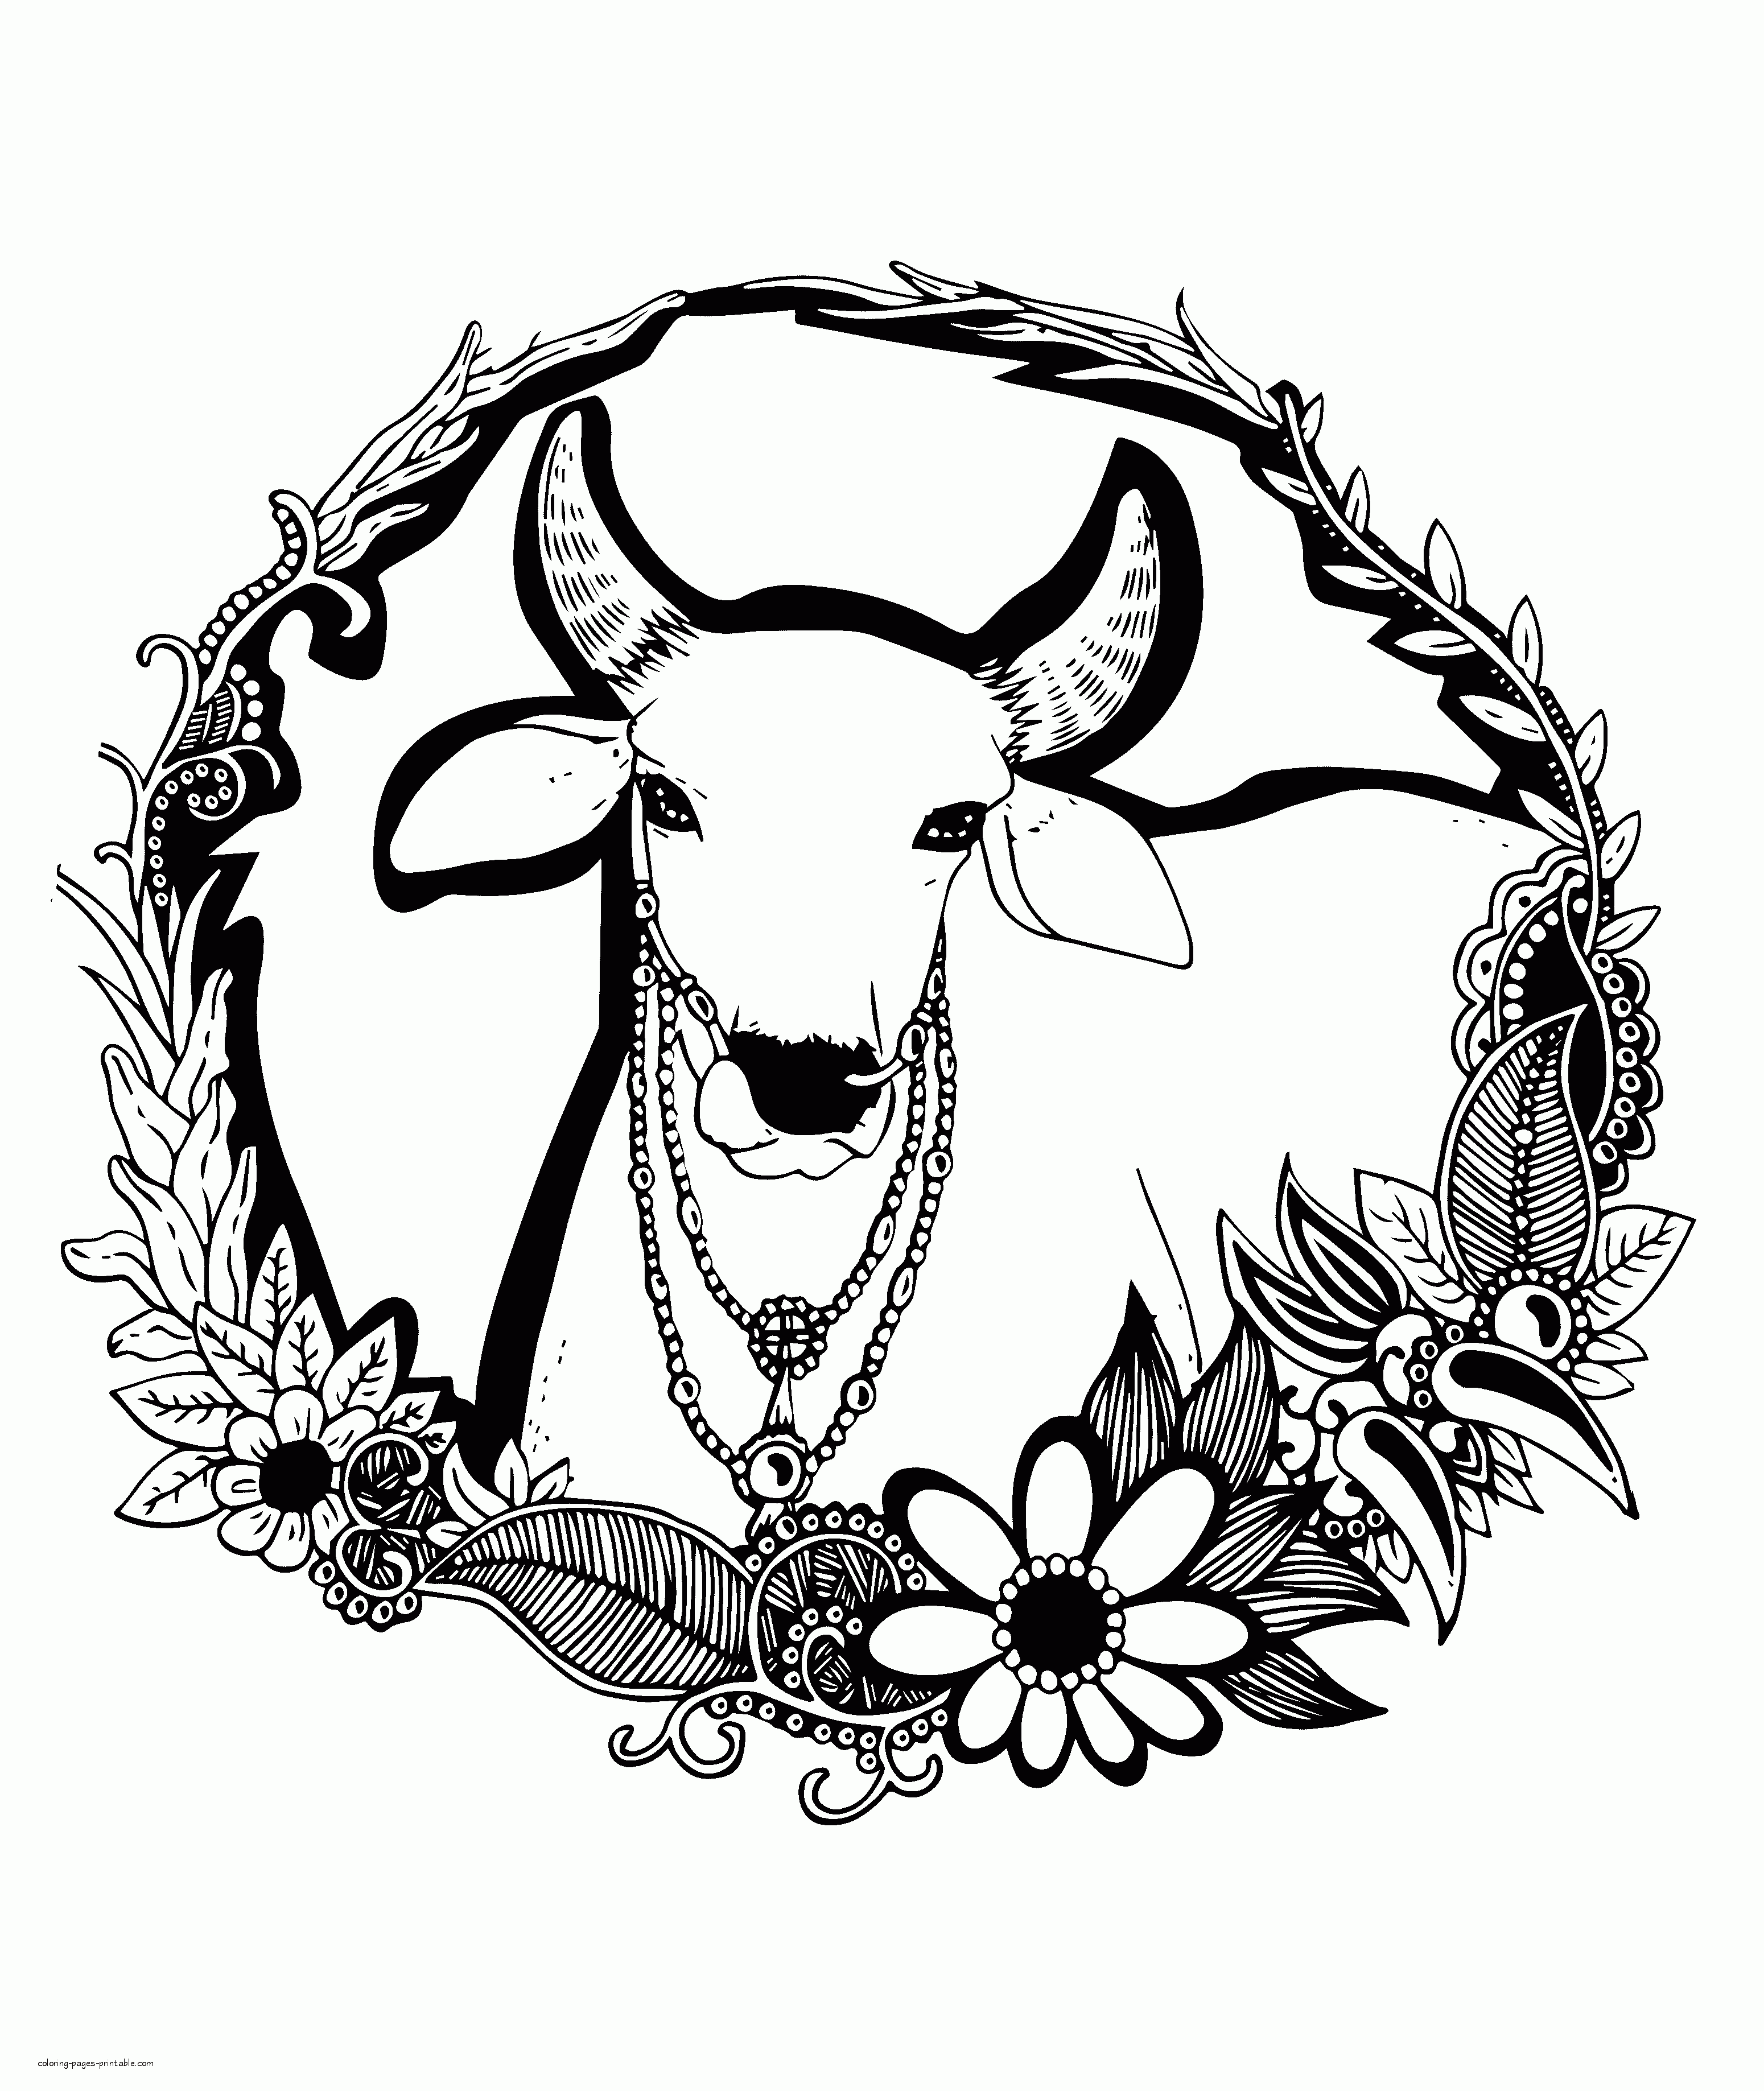 Cow Coloring Page For Adults. Animals